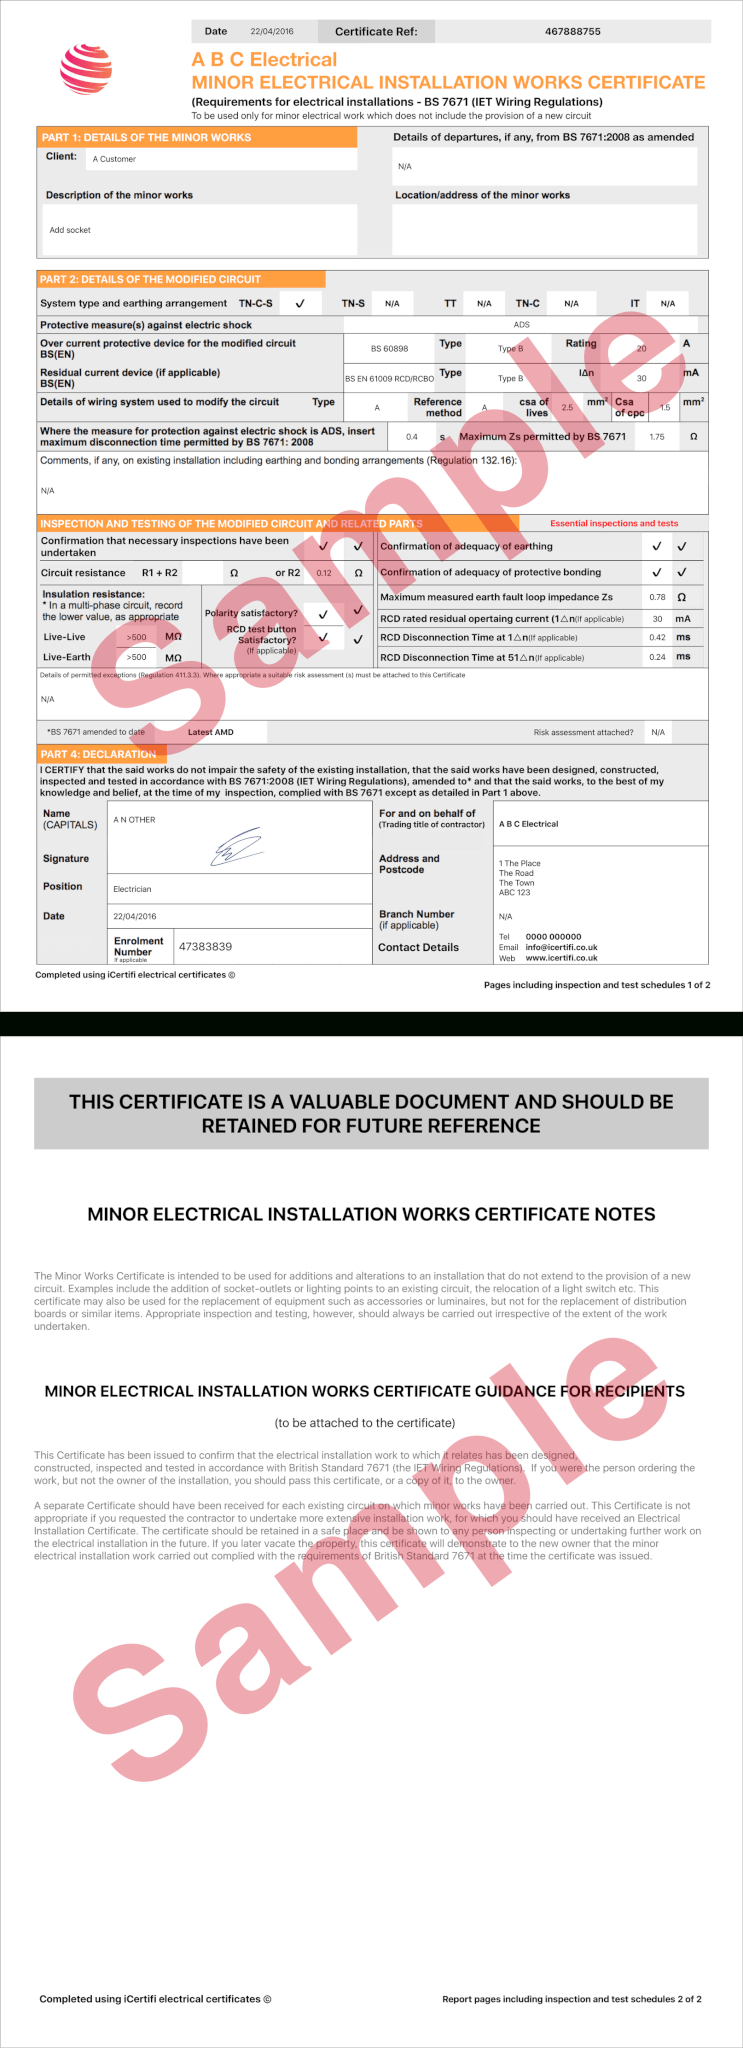 Electrical Certificate - Example Minor Works Certificate With Regard To Minor Electrical Installation Works Certificate Template